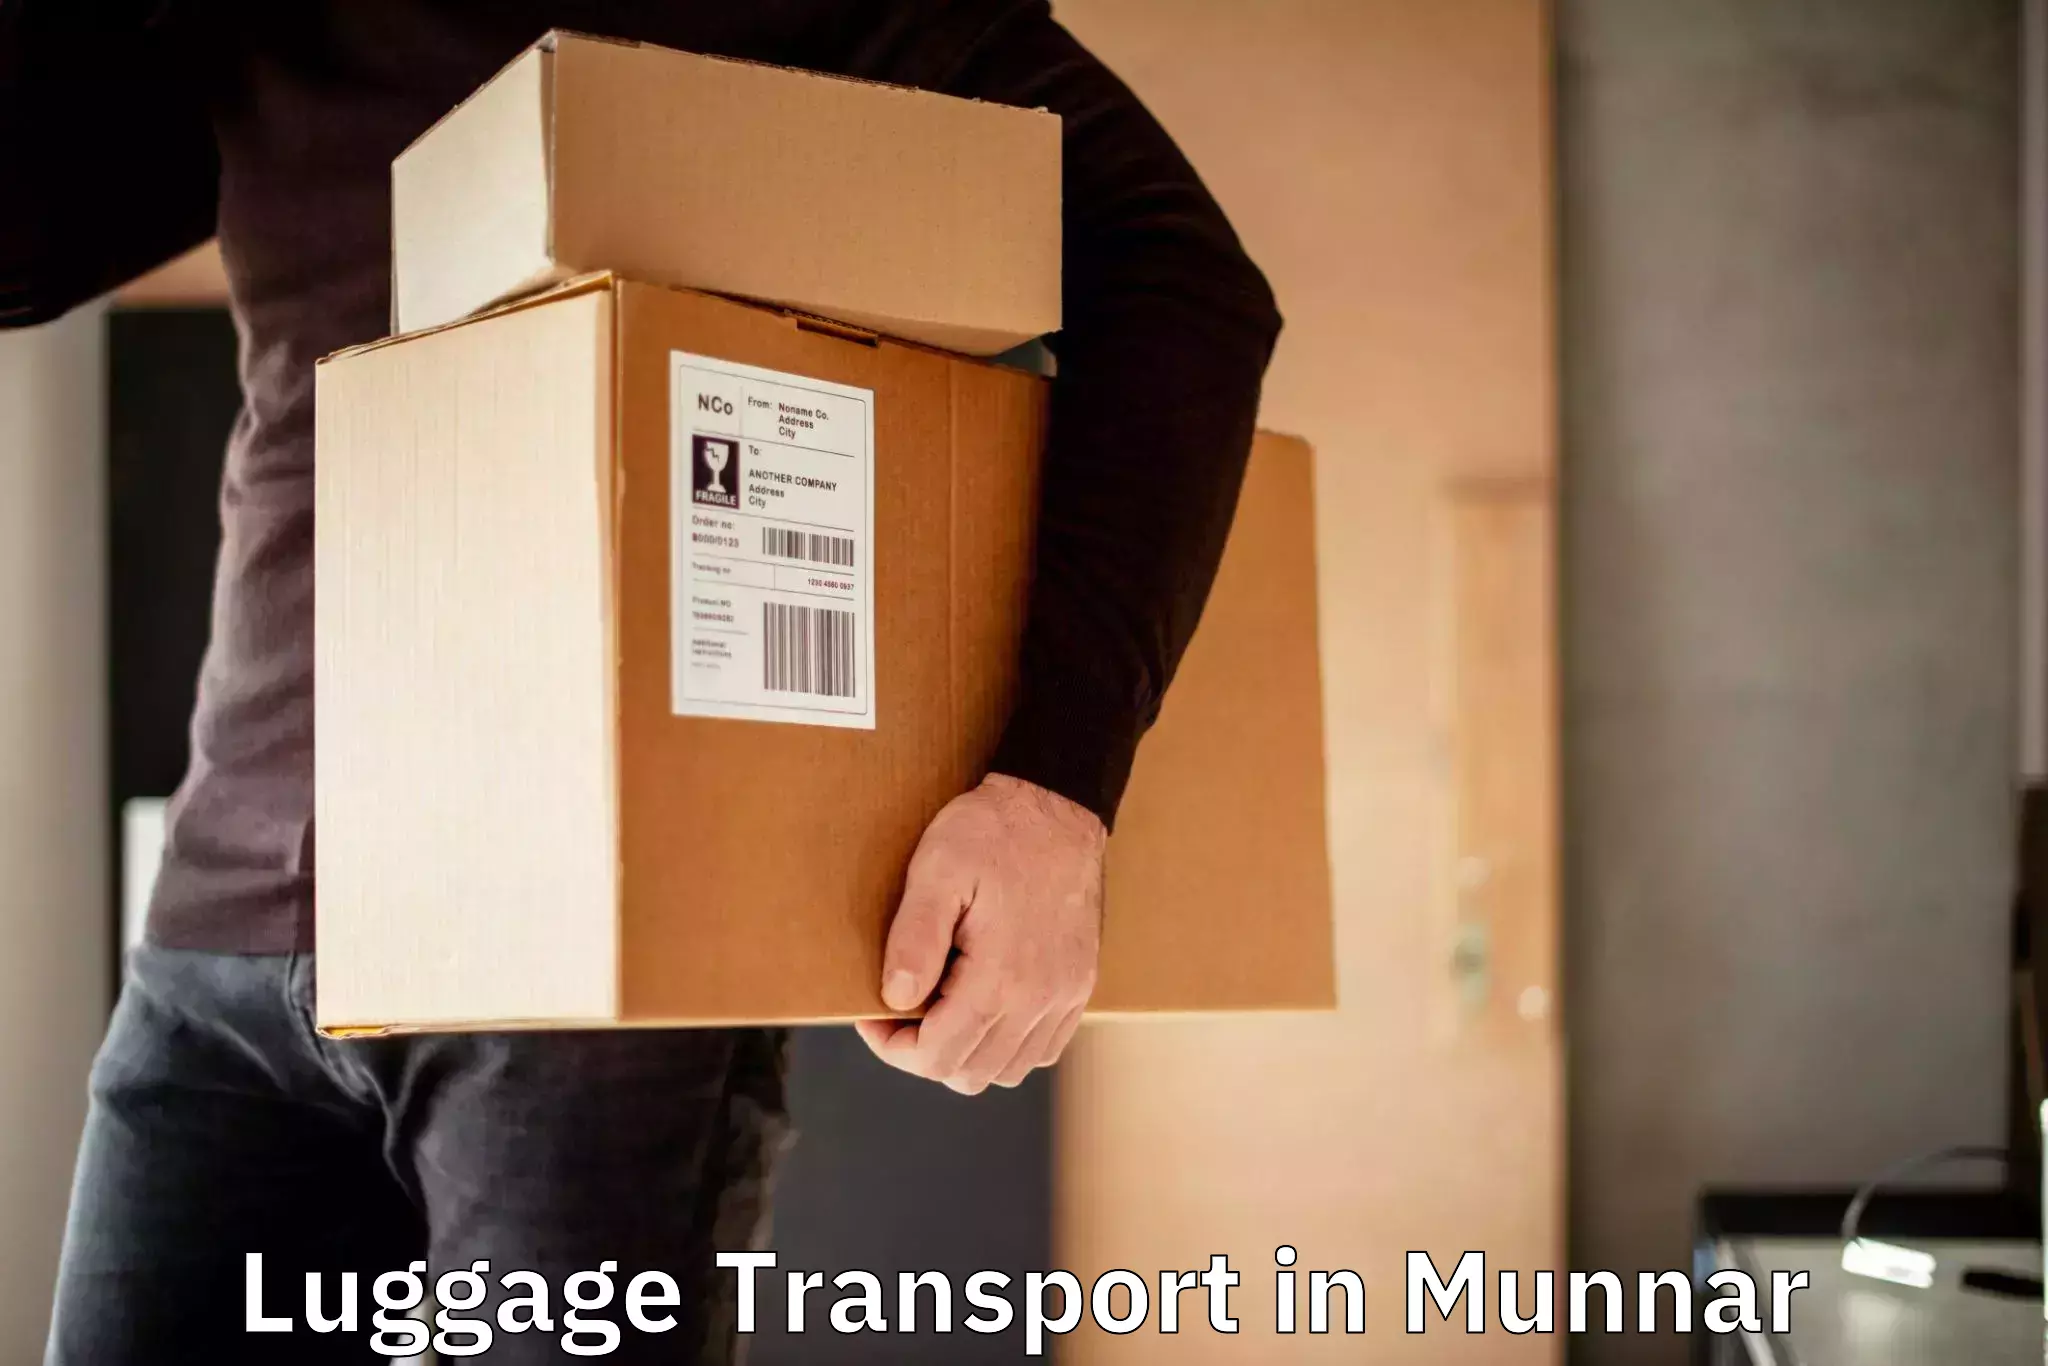 Luggage delivery logistics in Munnar